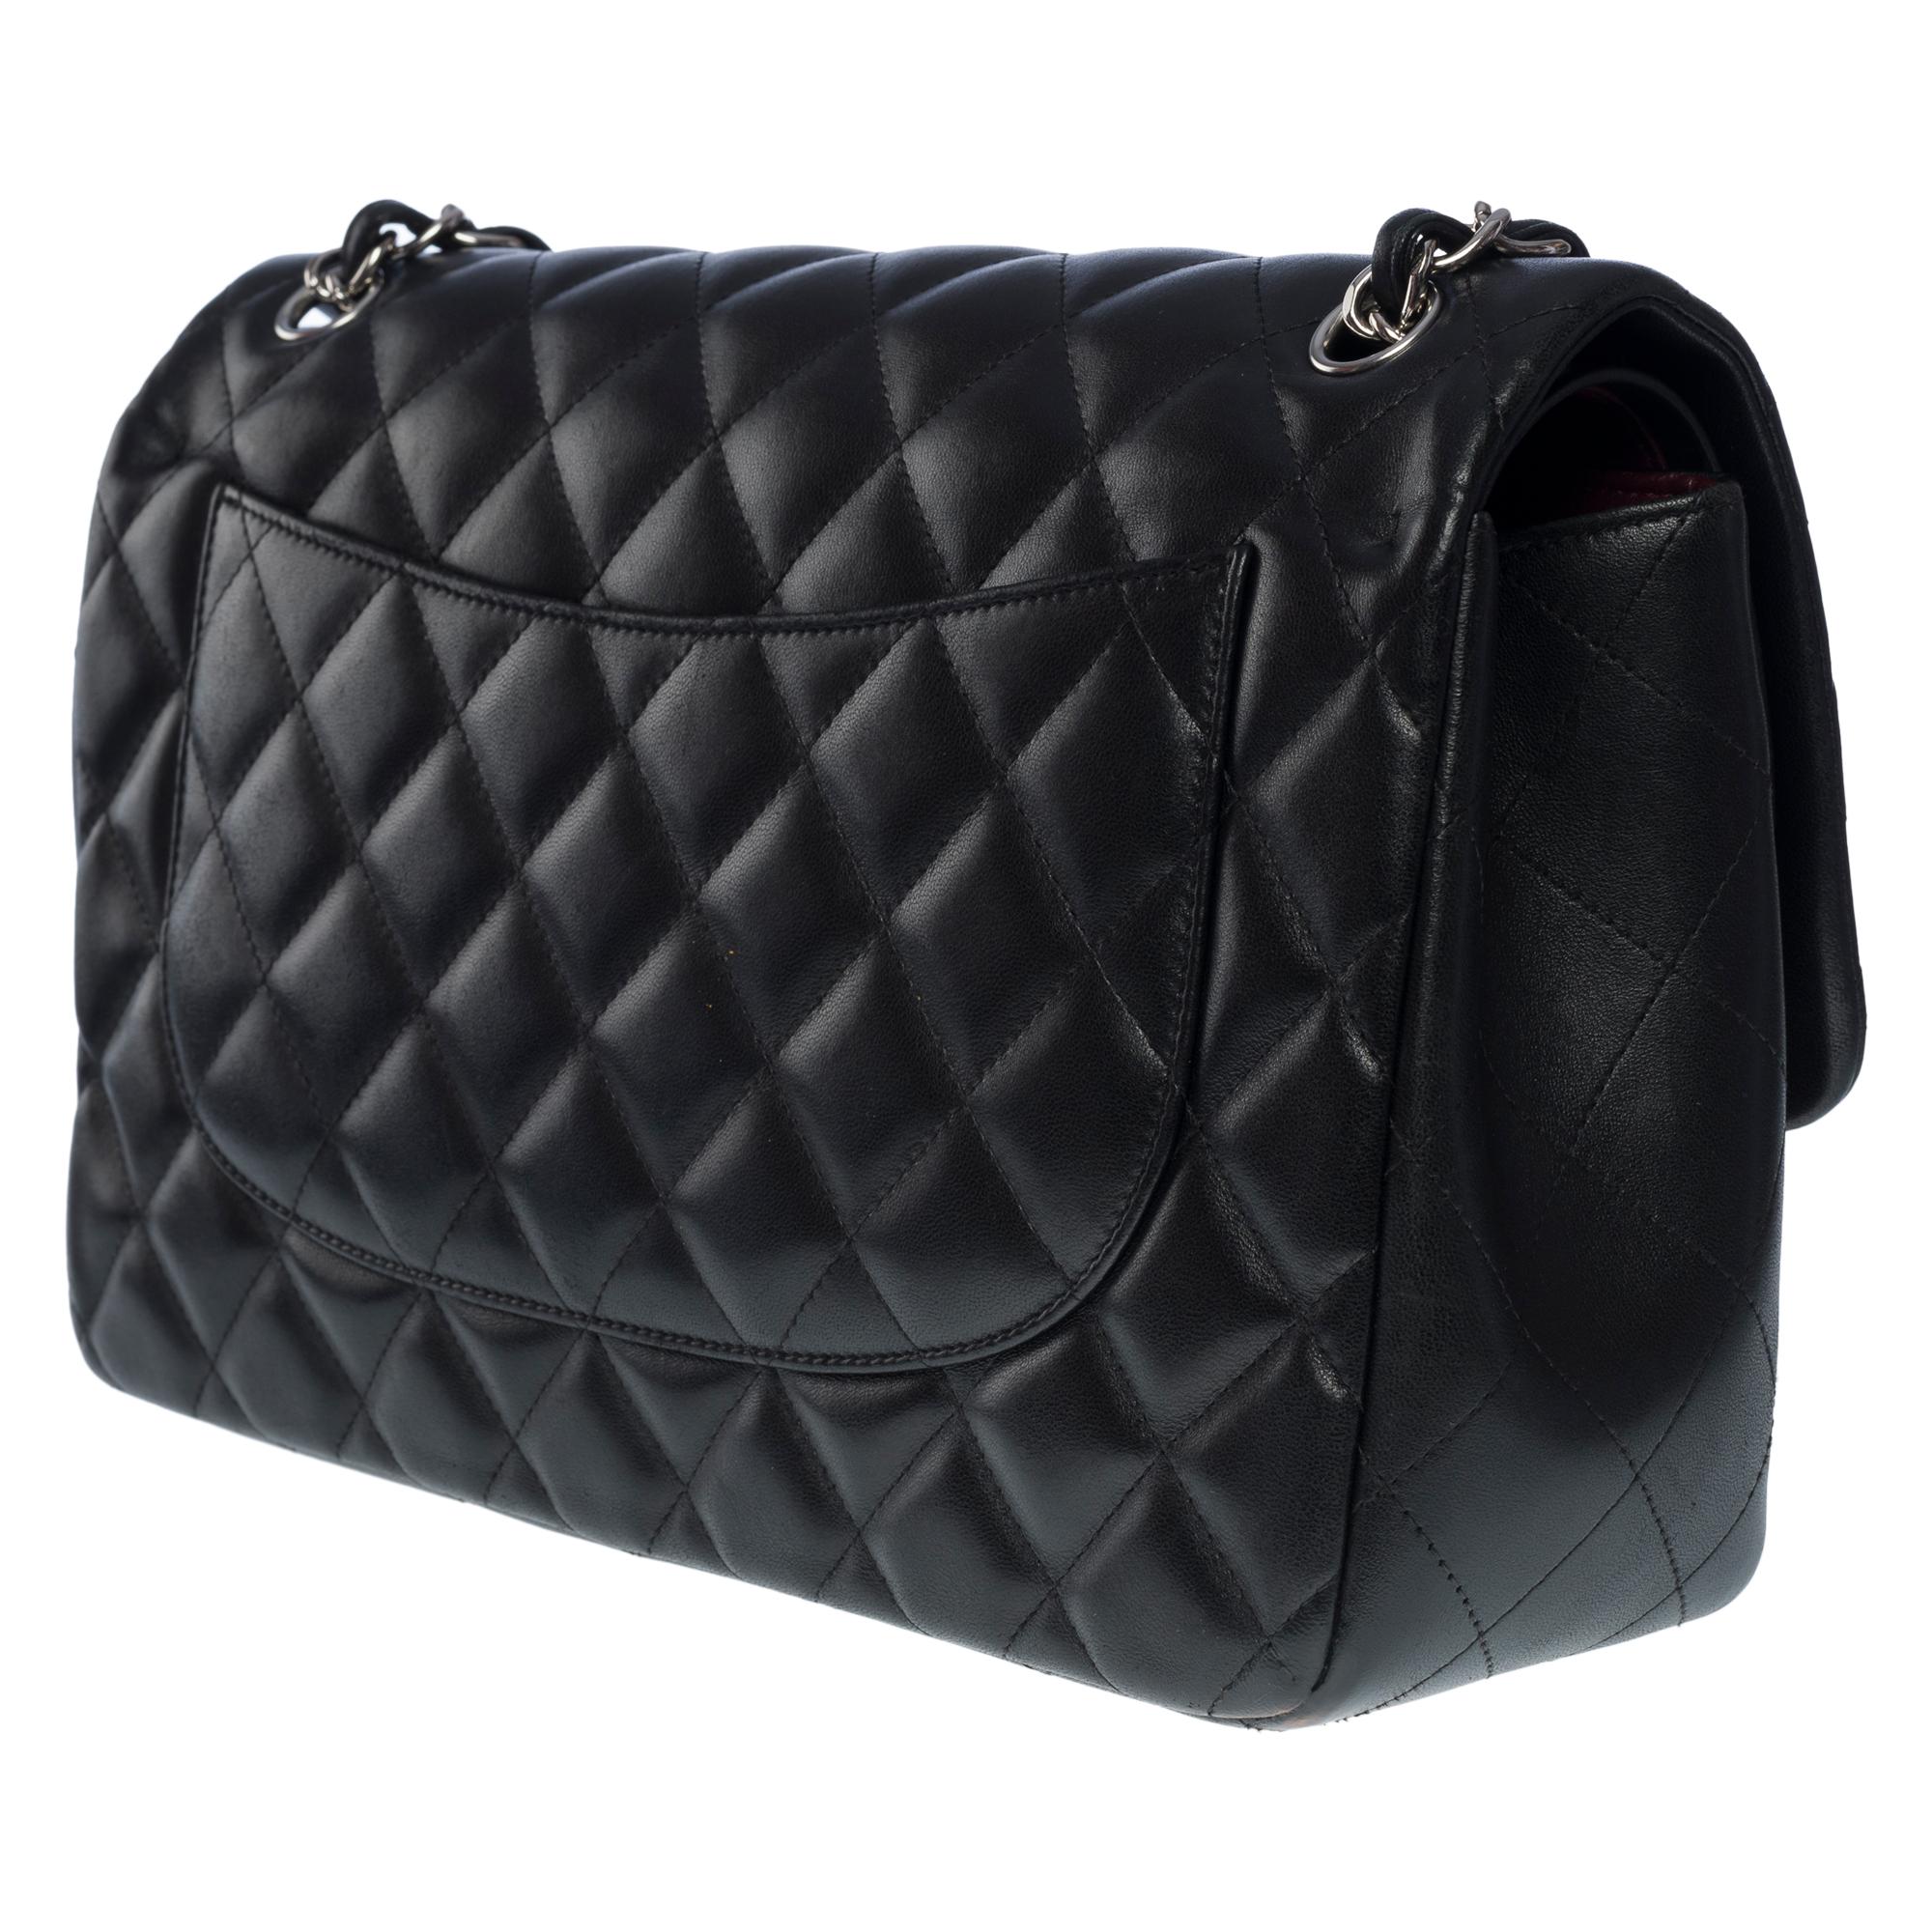 Chanel Timeless Jumbo double flap shoulder bag in black quilted lamb leather, SHW 1